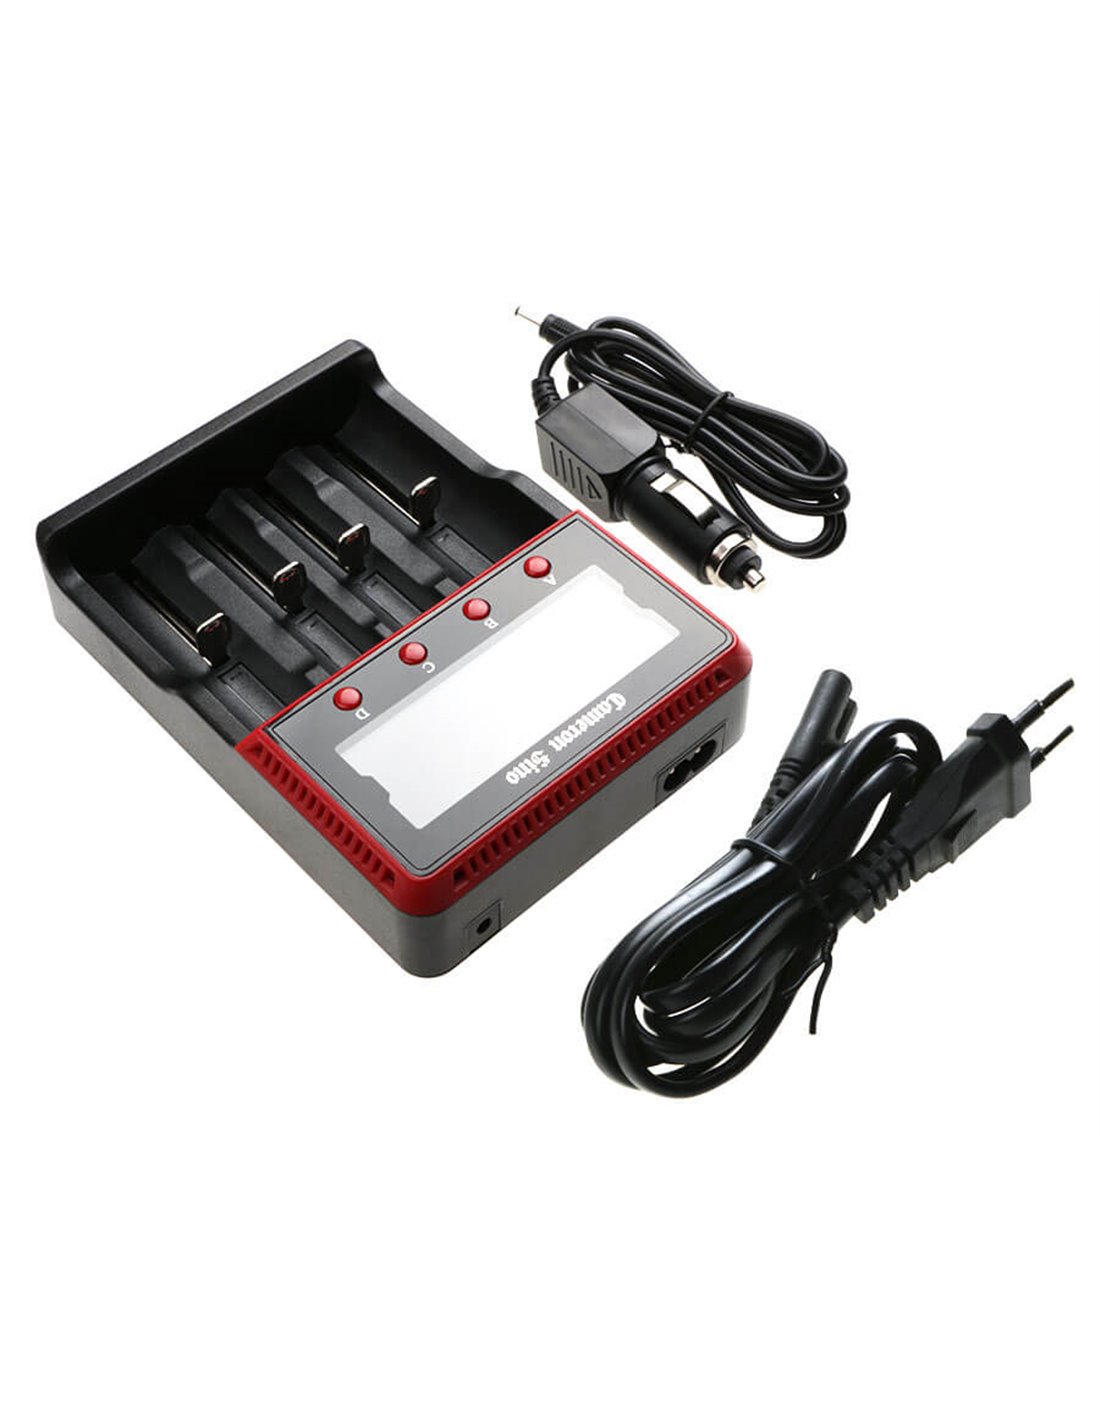 Mains Four Slot Charger for AA, AAA 18650 Charges NiMh & Lithium Ion Cells Euro Plug